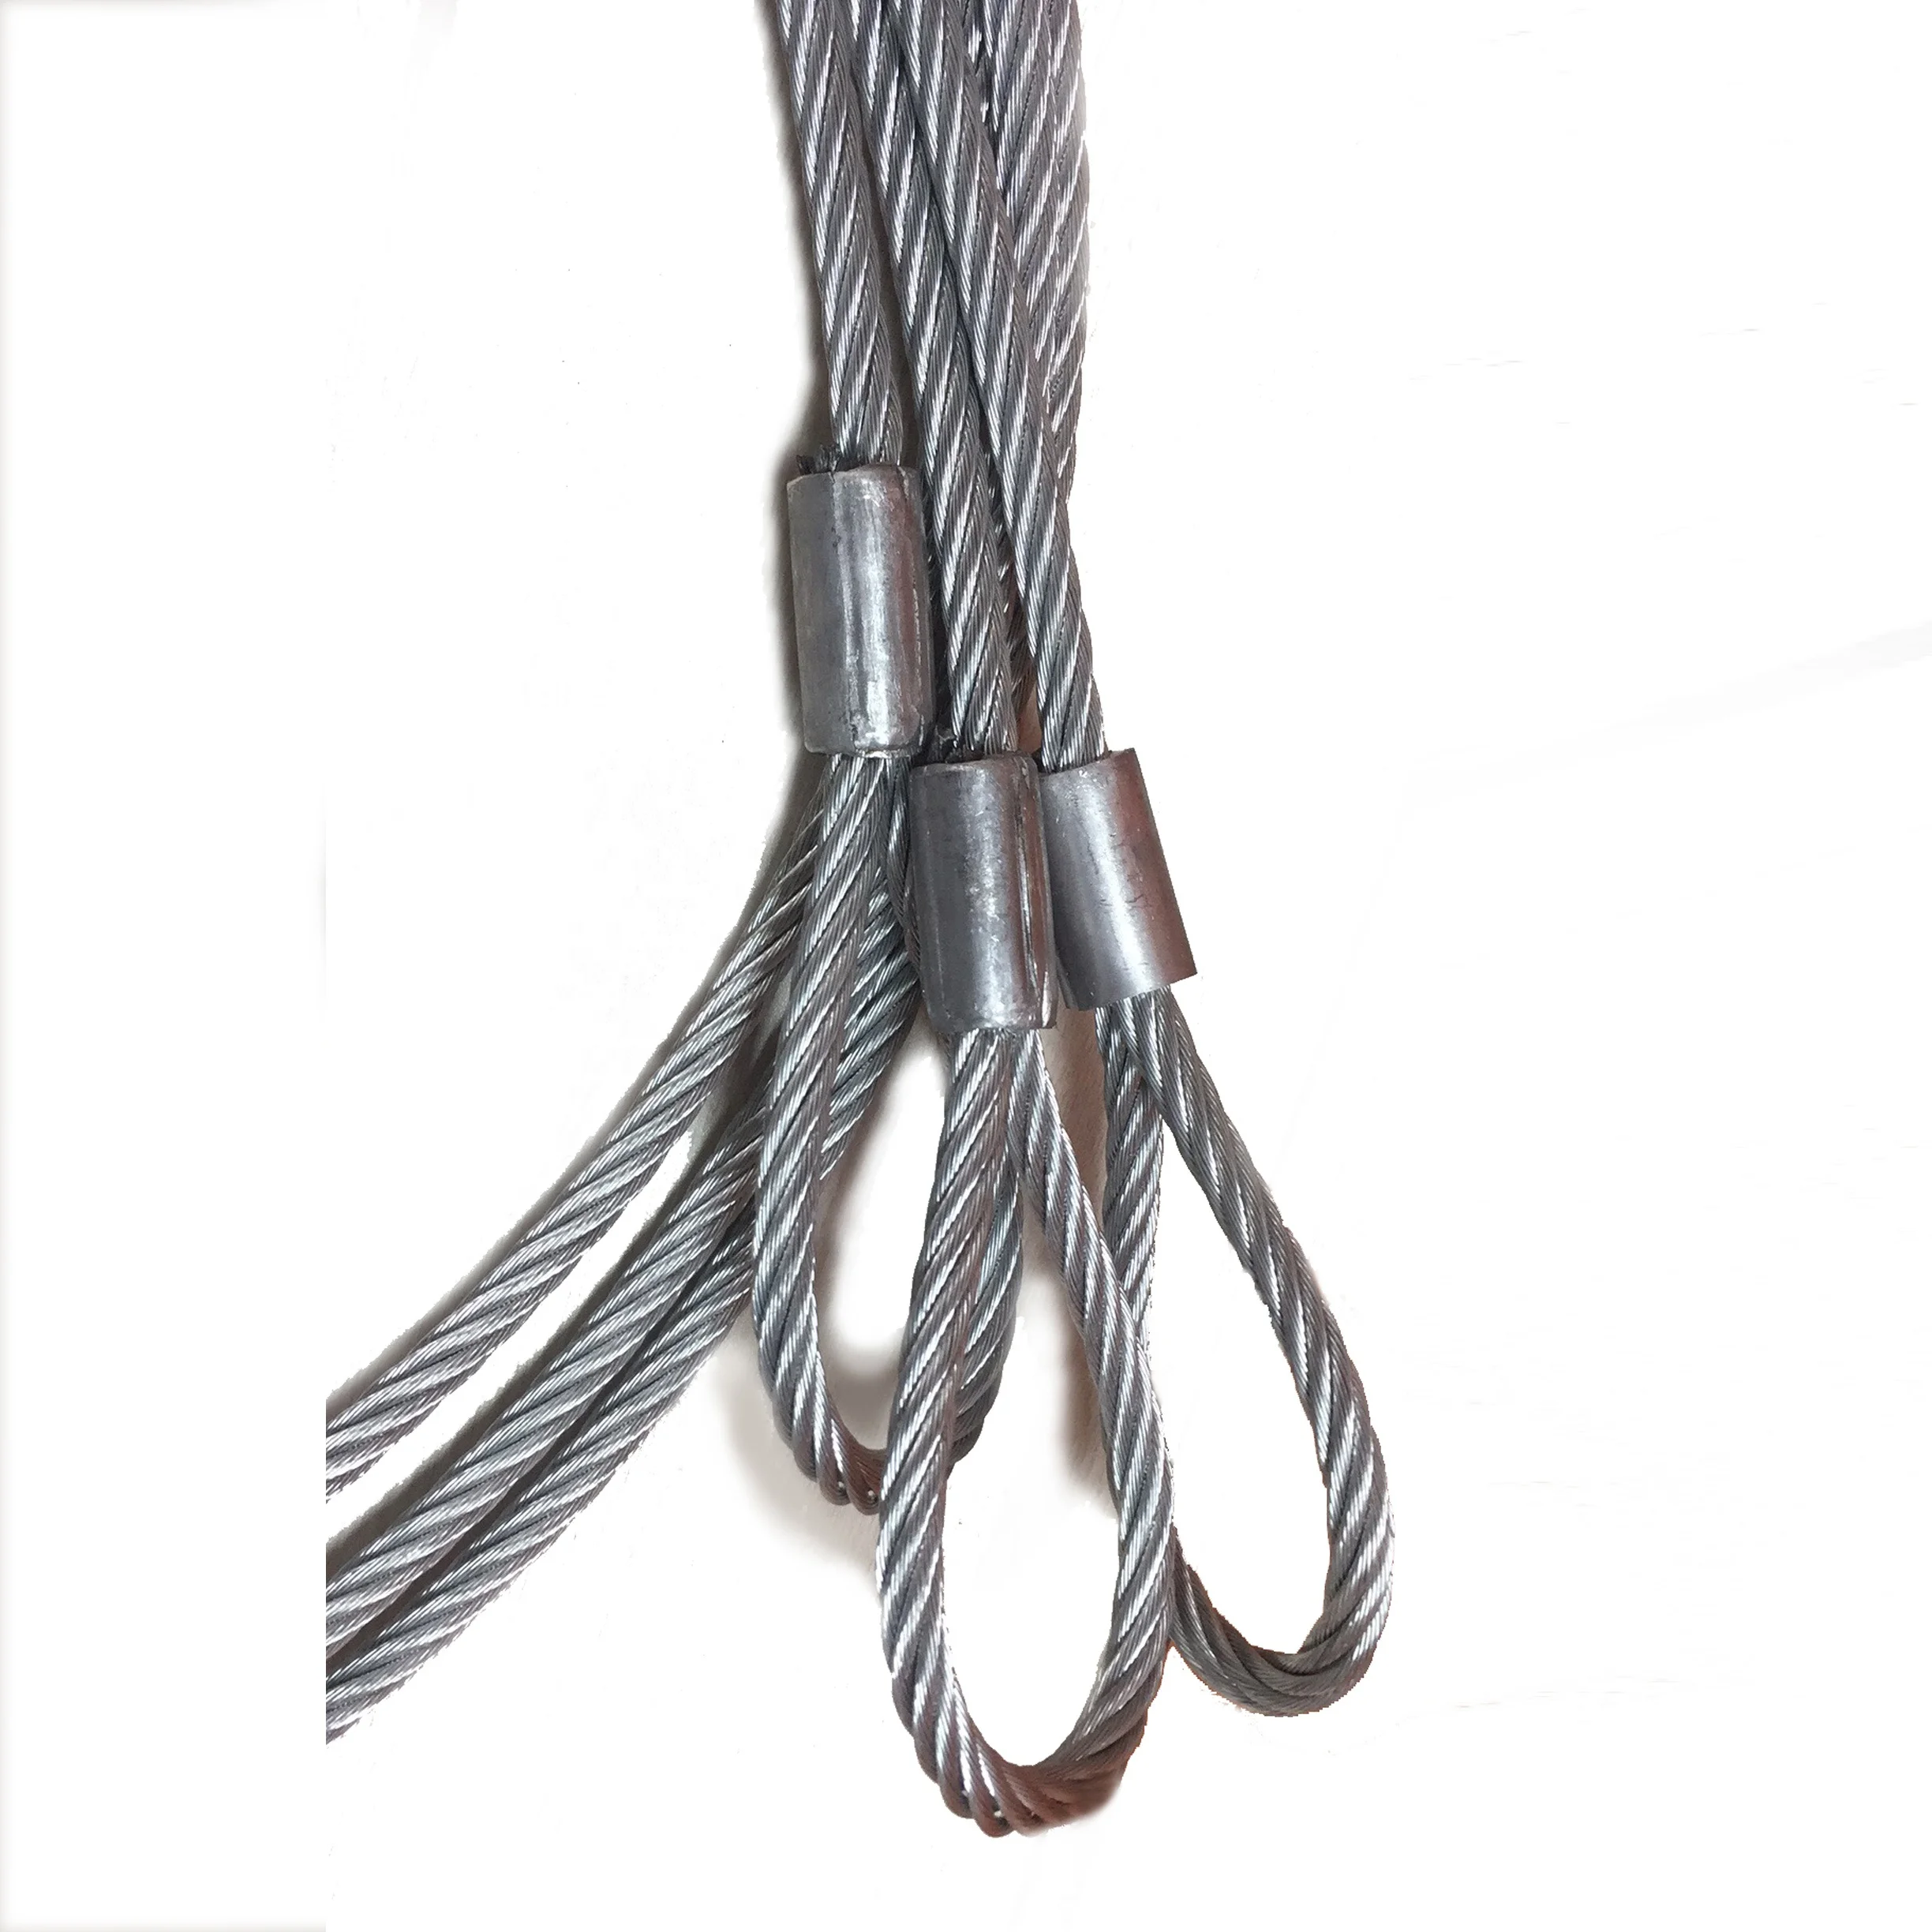 Dongguan Zhumeng Stainless Wire Rope With Assembly Finishing As Tool Used Buy Stainless Steel Wire Rope Wire Rope With Assembly Finishing Wire Rope With Assembly Finishing As Tool Used Product On Alibaba 